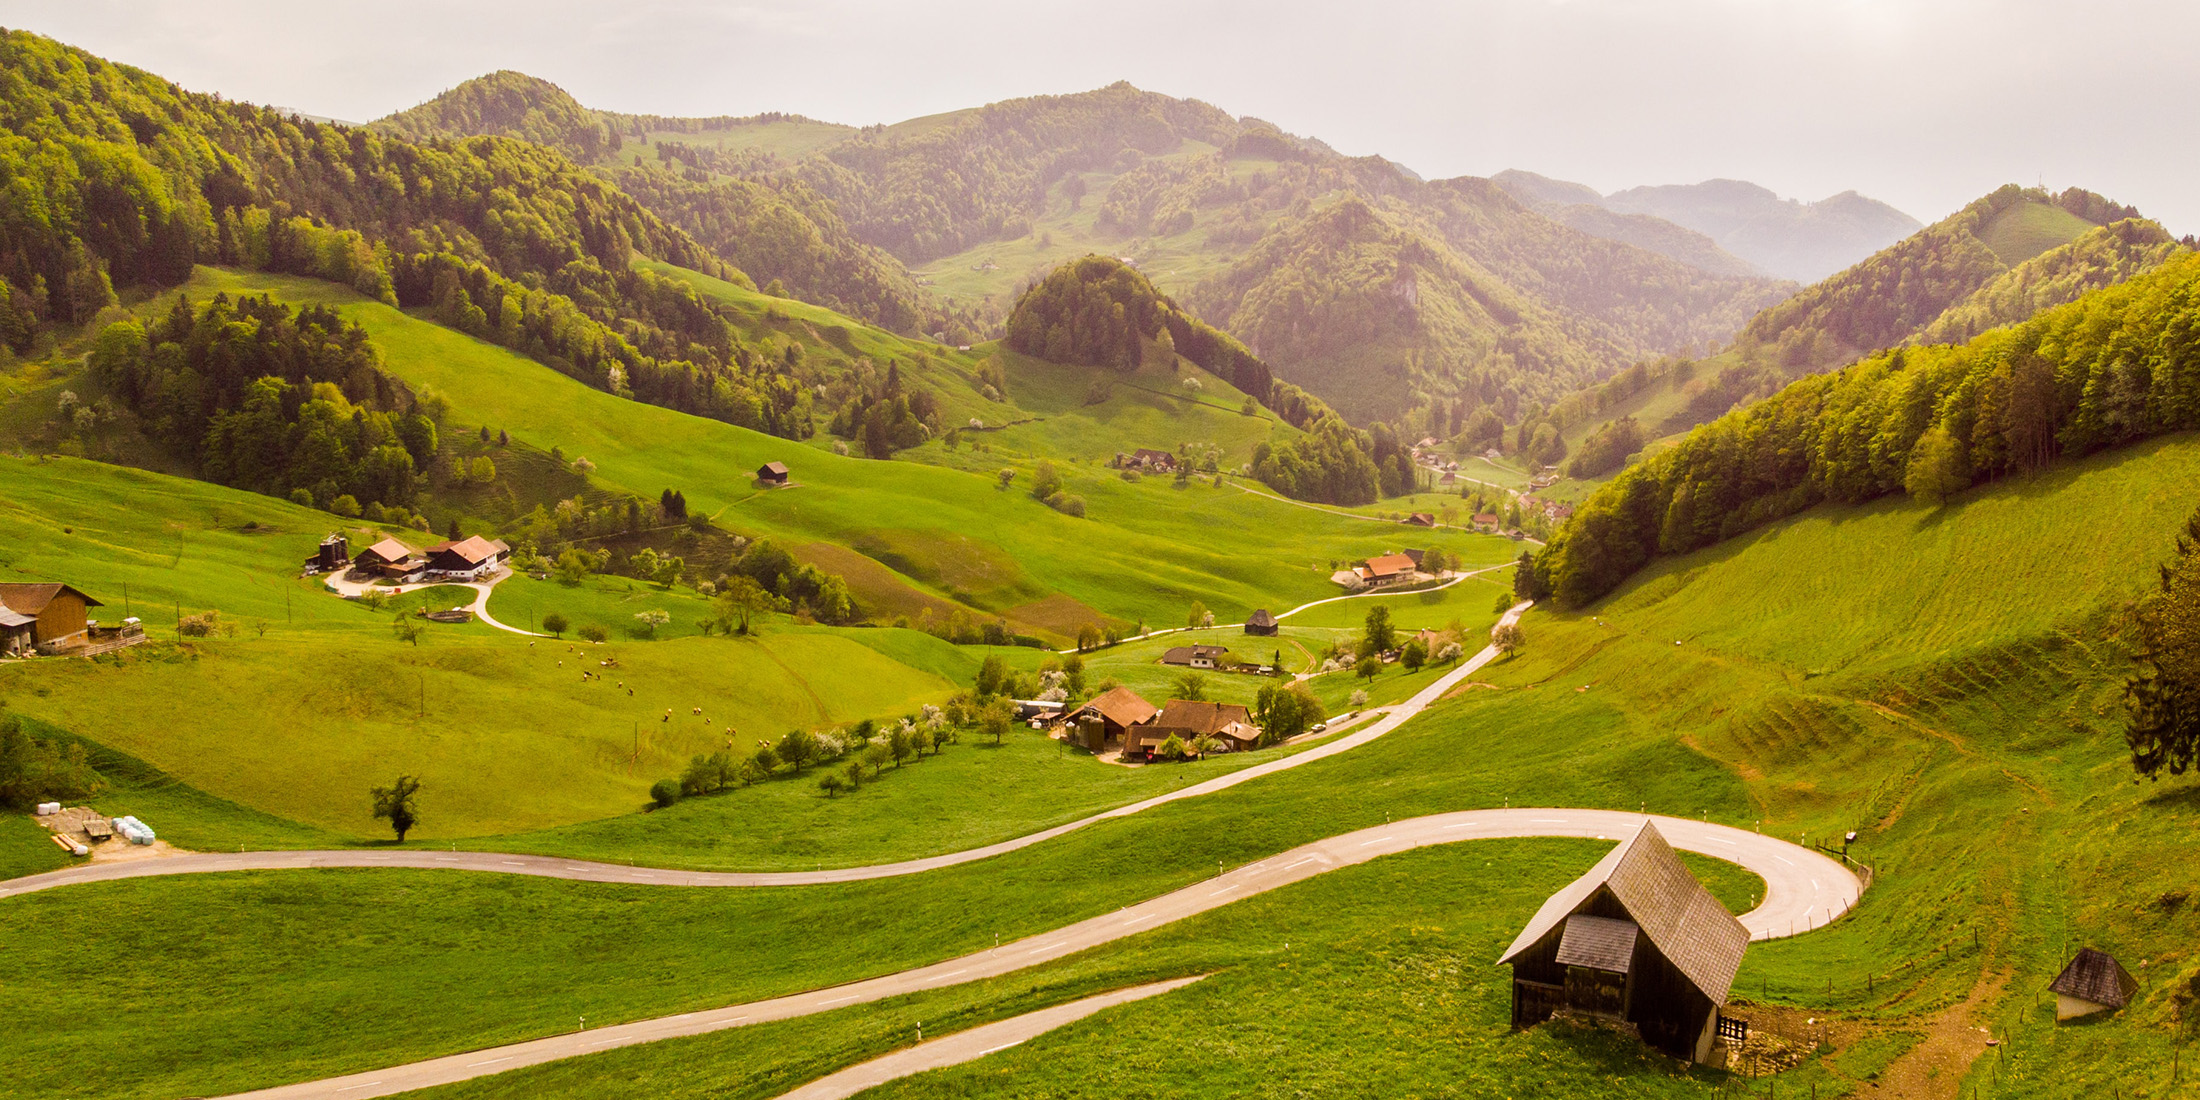 The Dreamiest Places: Switzerland